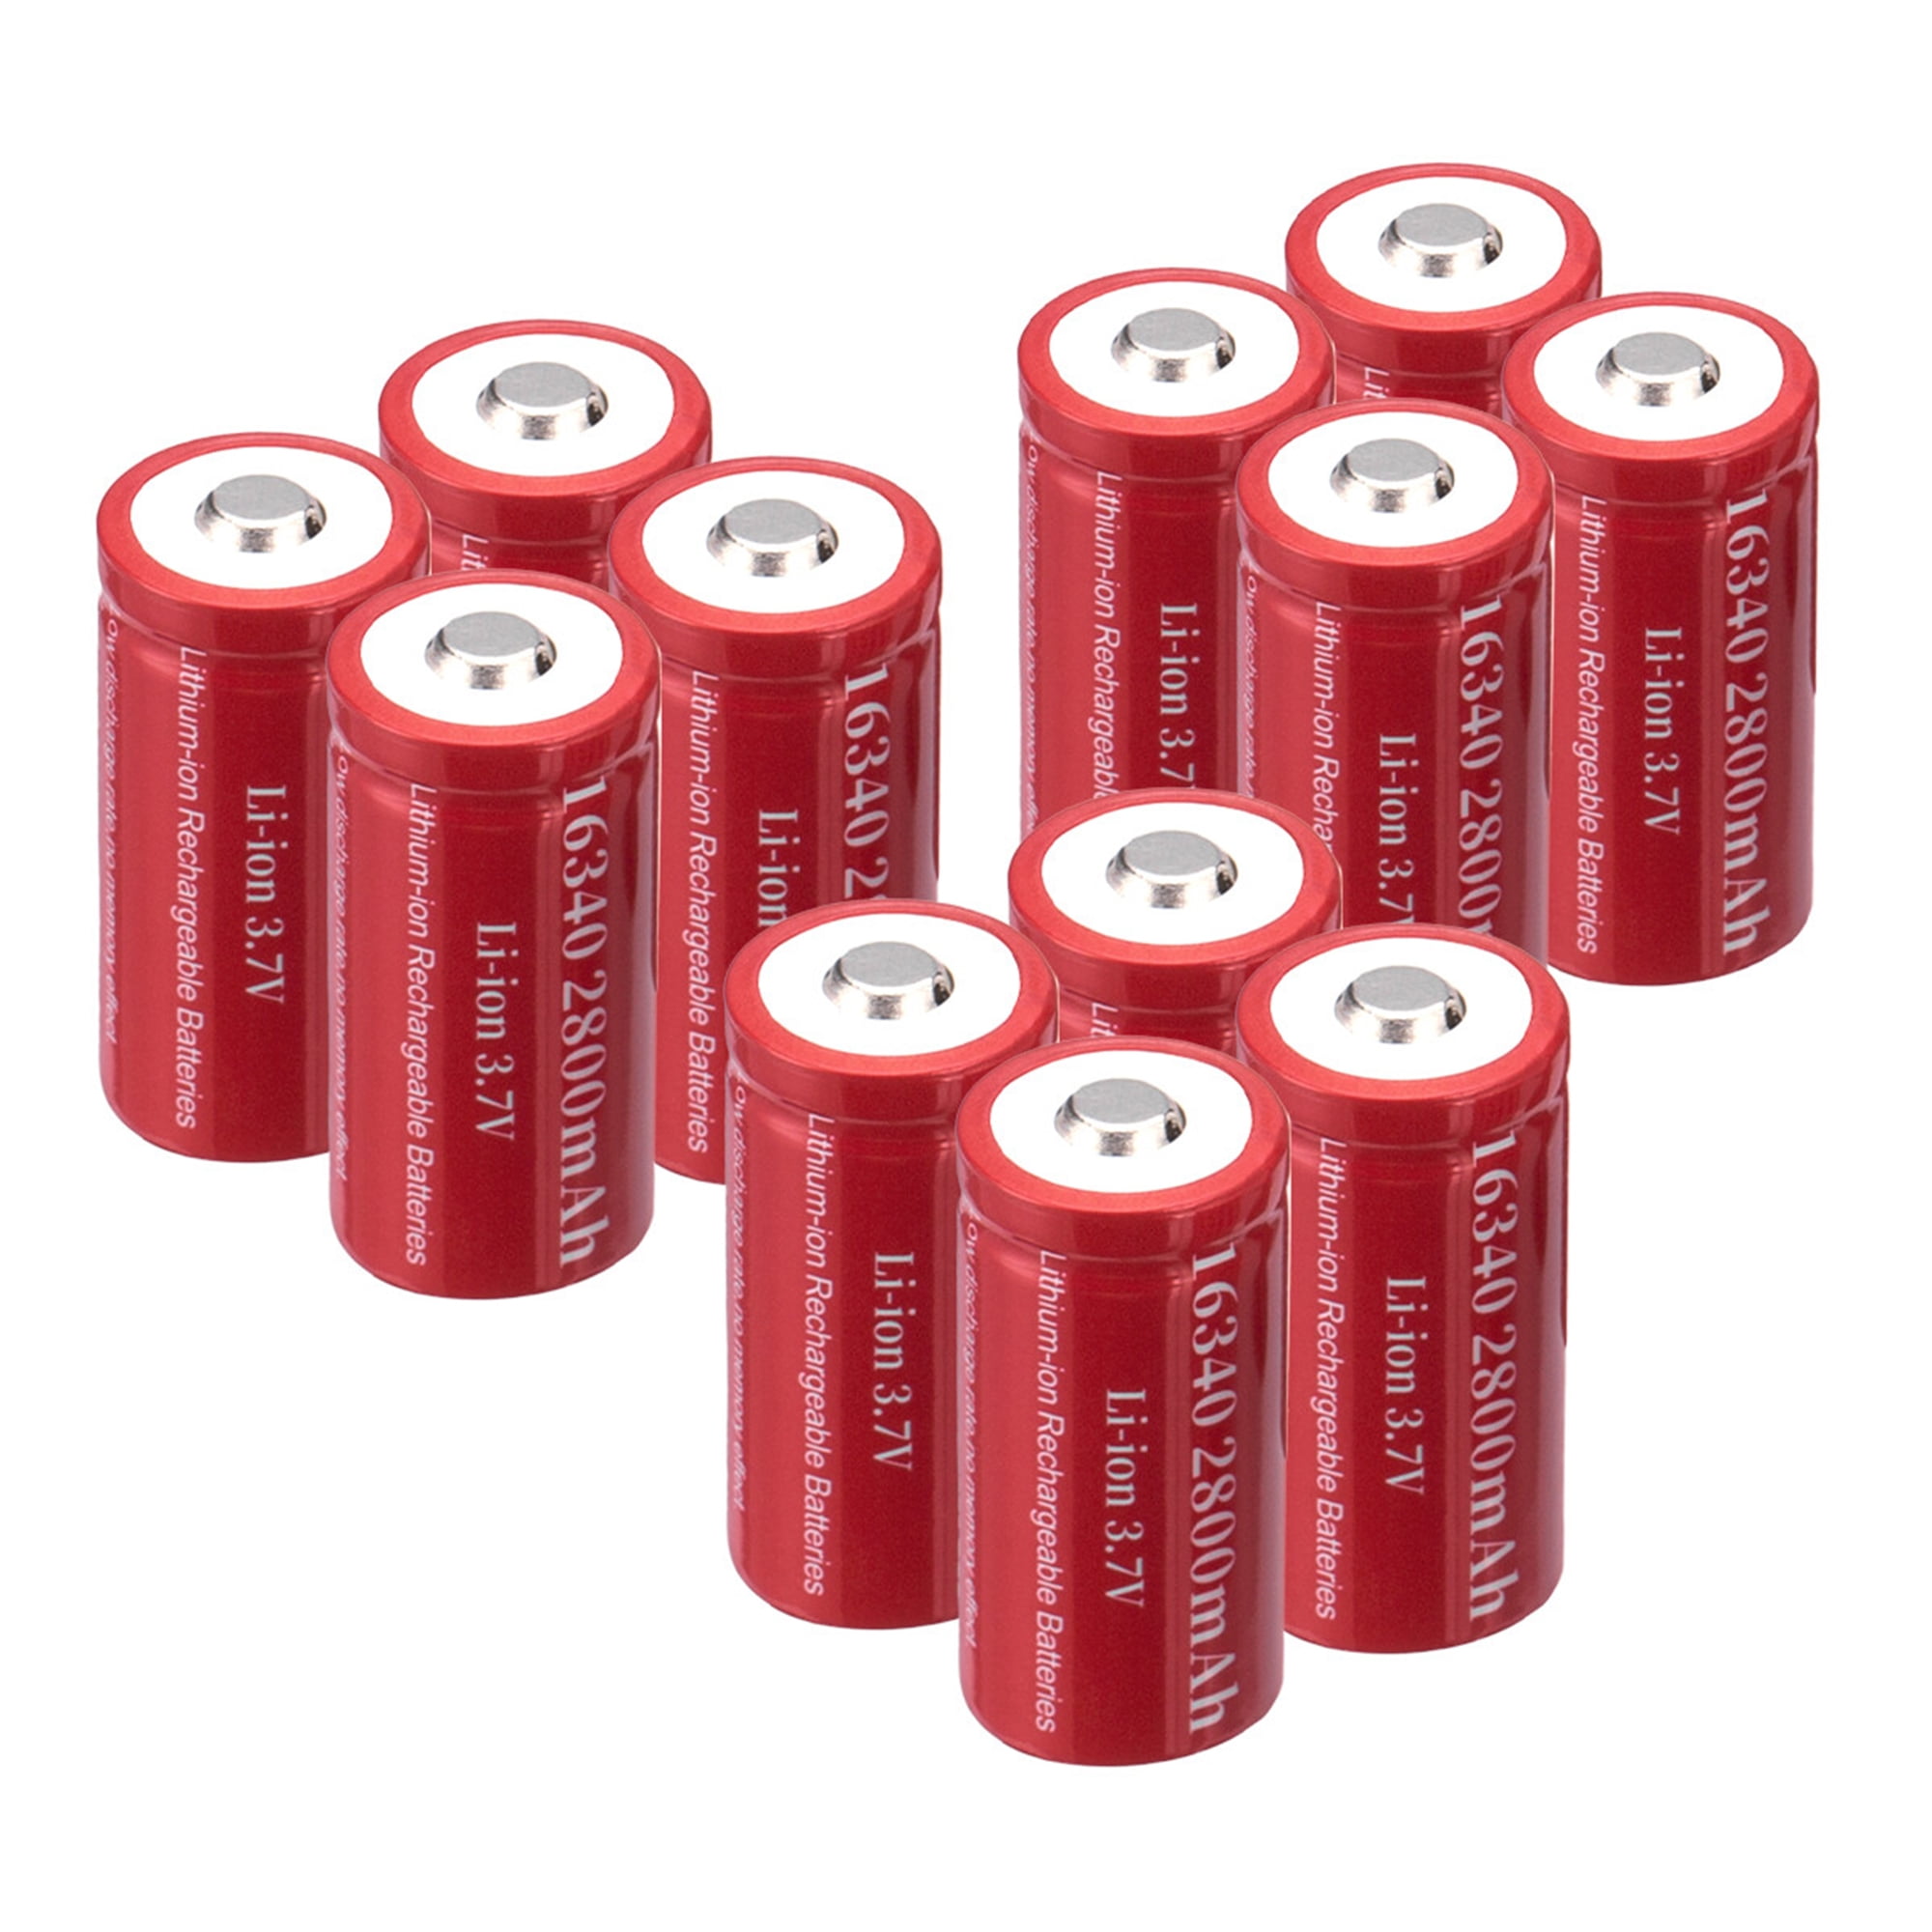 3.7V 2800mAh 16340 CR123A Rechargeable Batteries, 12-Pack